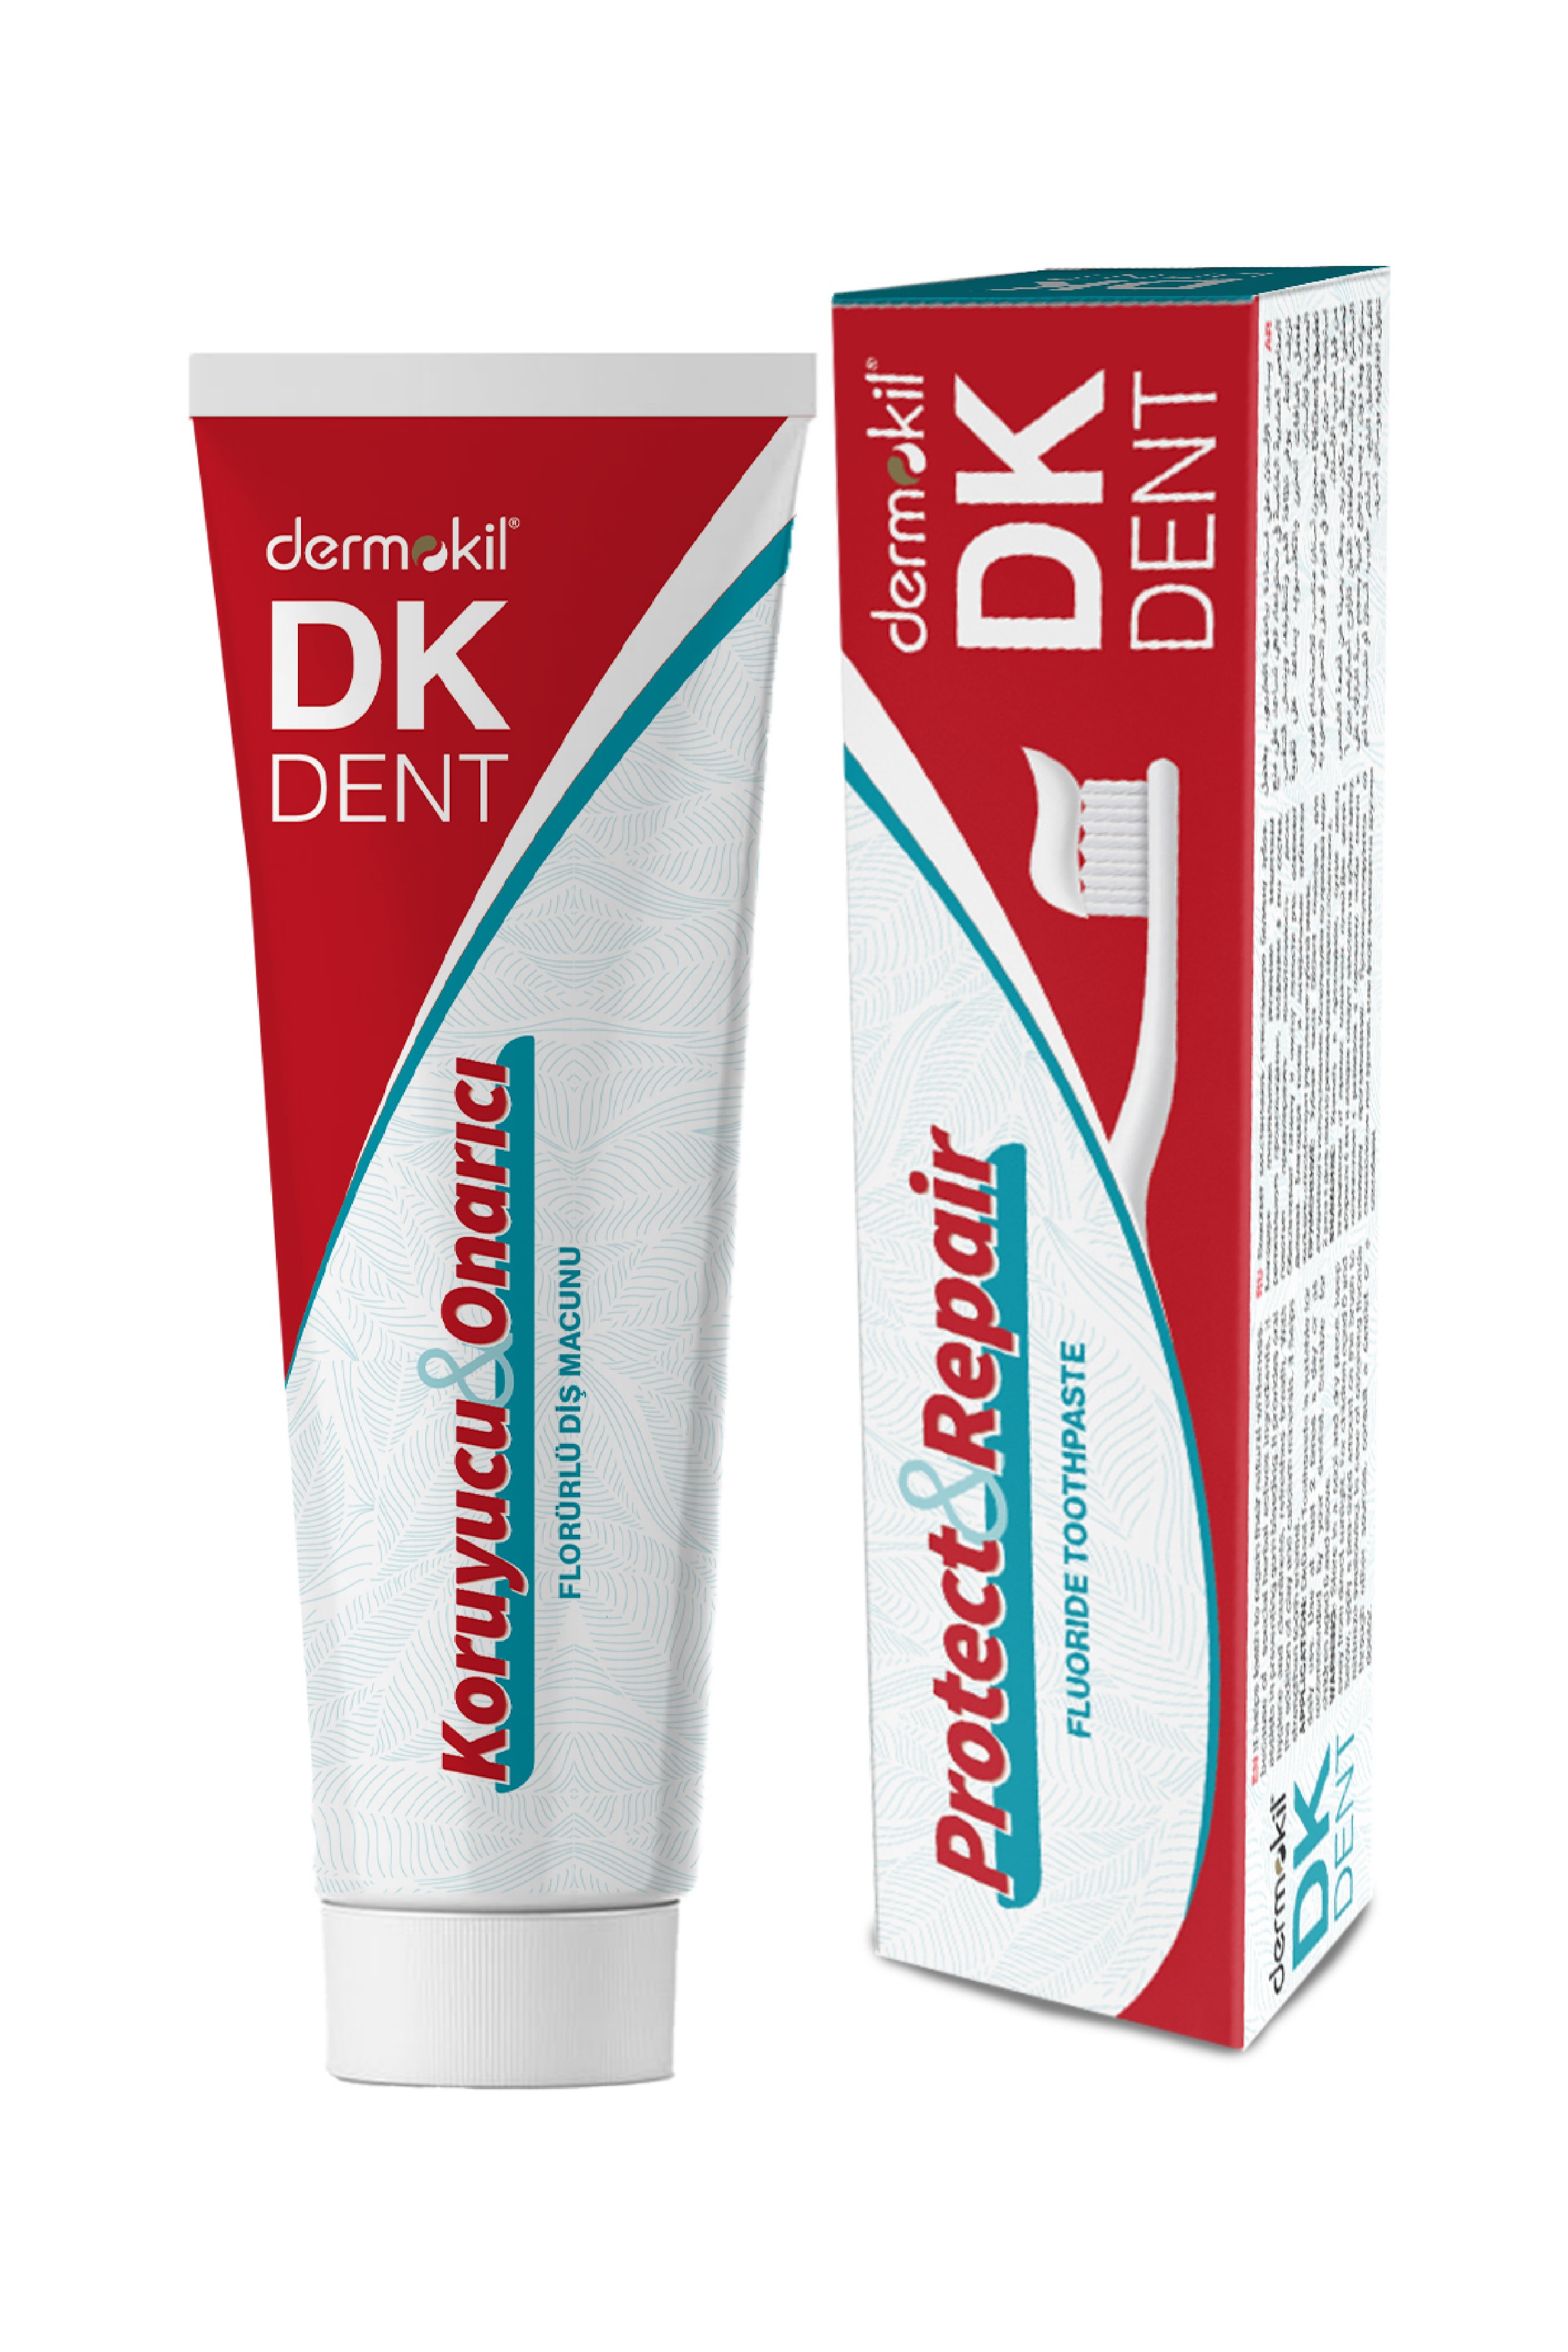 Dk Dent Fluoride Protective and Repairing Toothpaste 100 ml